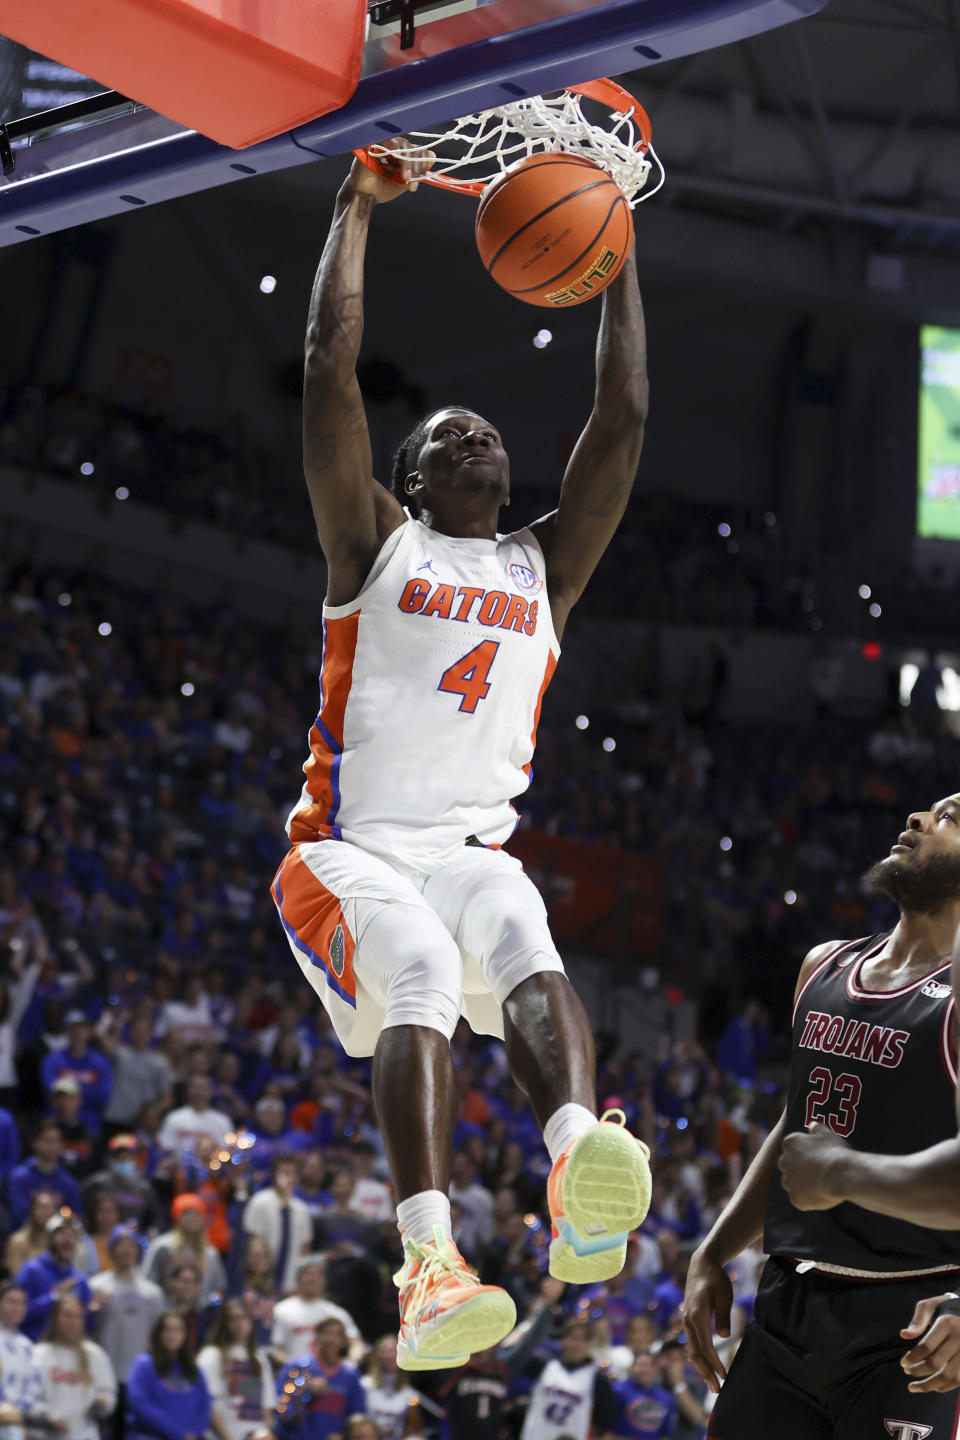 Florida forward Anthony Duruji (4) dunks against Troy during the first half of an NCAA college basketball game Sunday, Nov. 28, 2021, in Gainesville, Fla. (AP Photo/Matt Stamey)